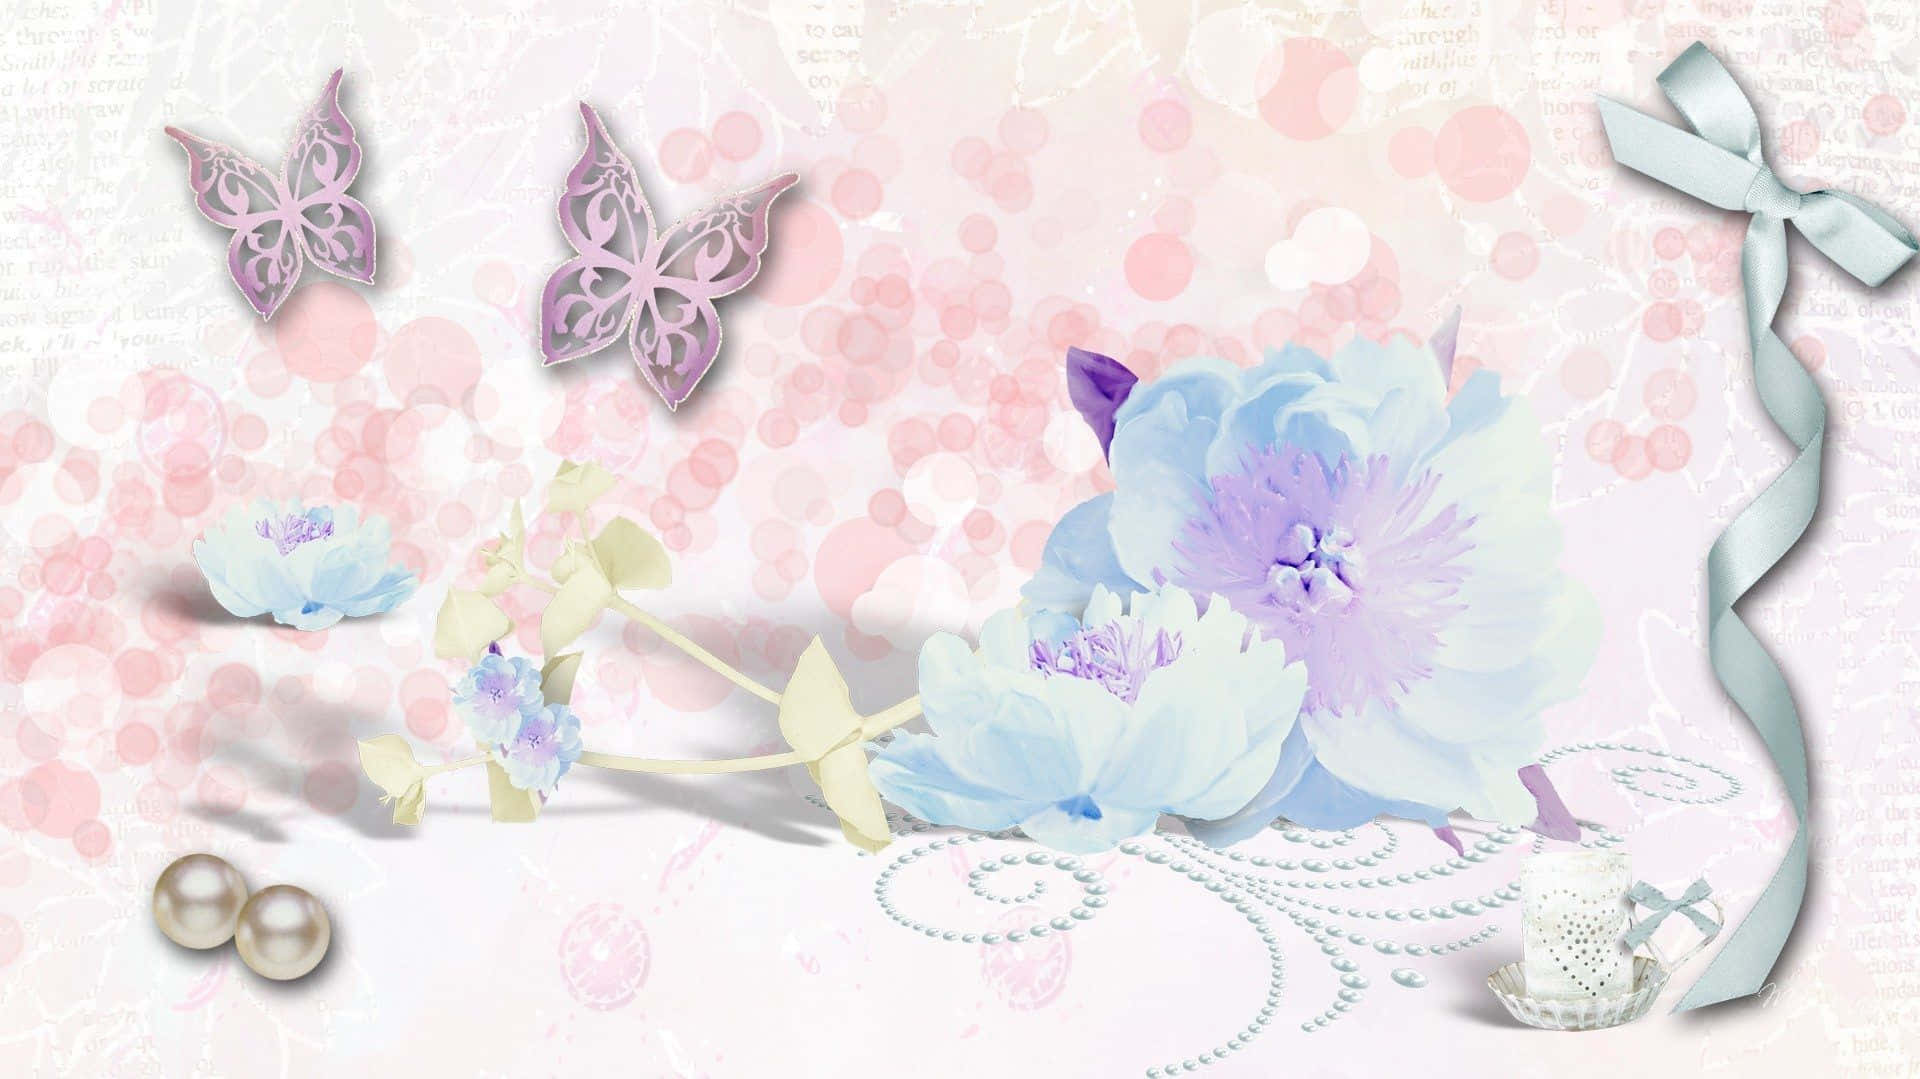 A delightful light pastel background with a dainty floral pattern